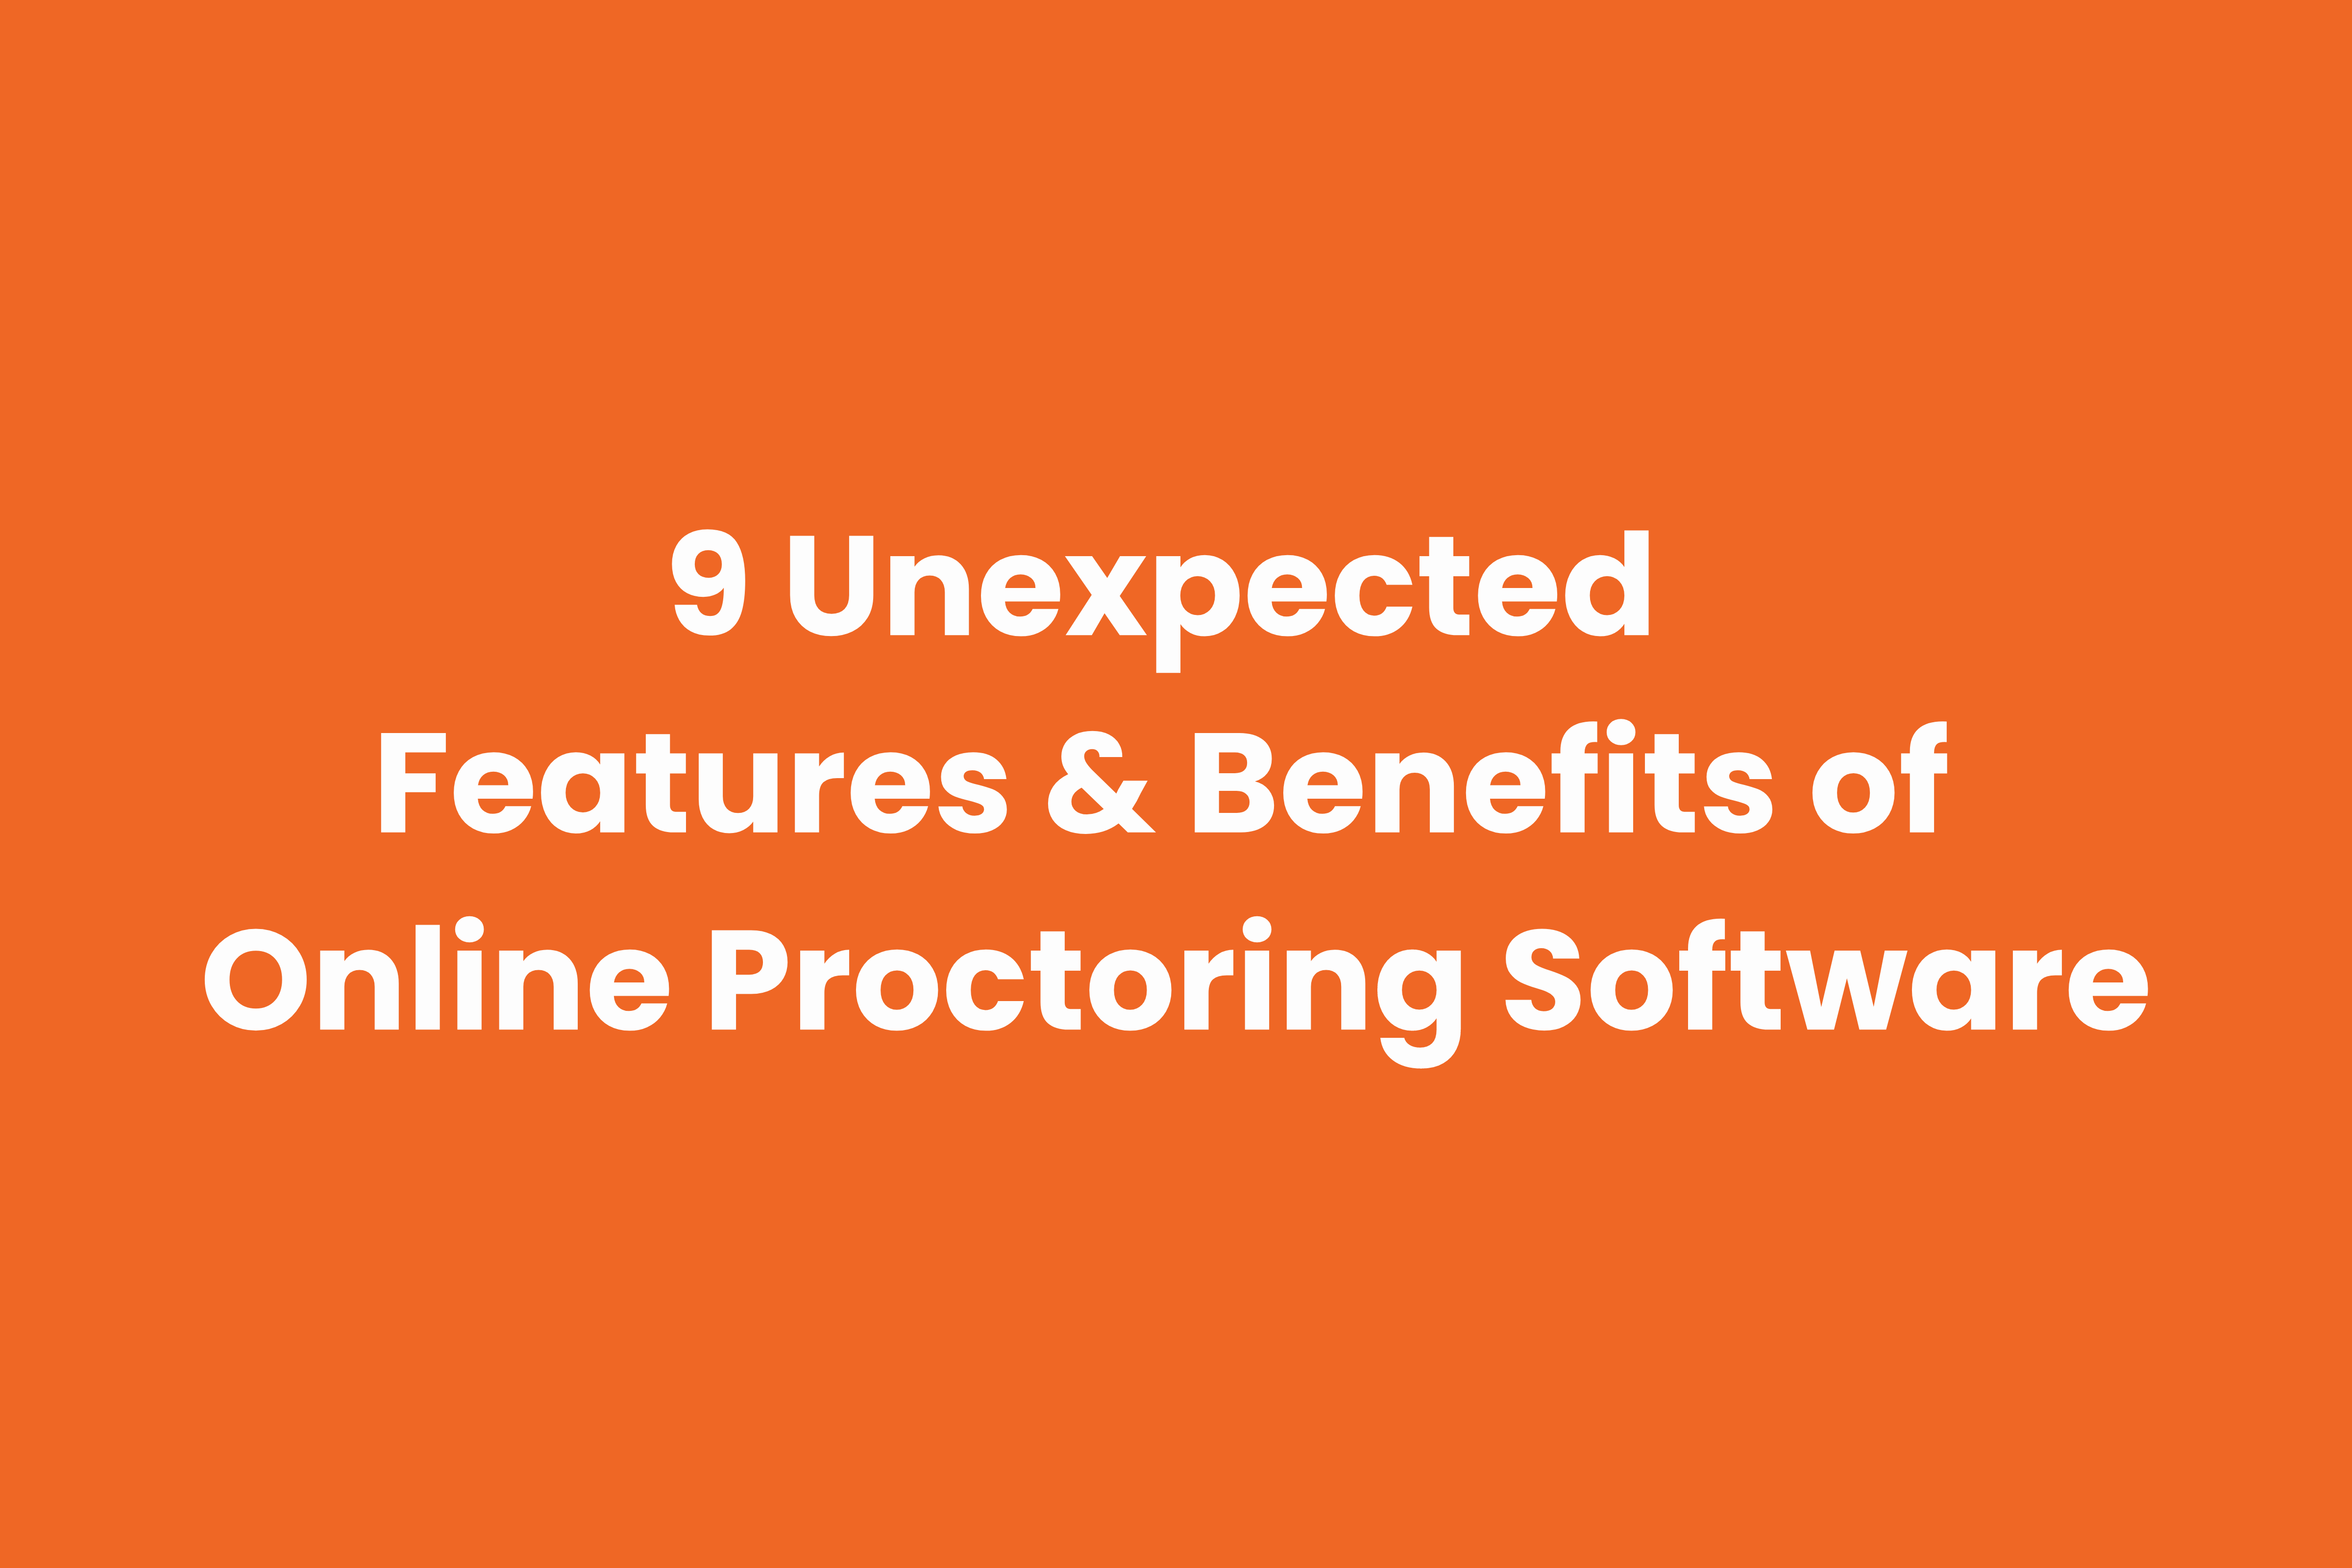 Best features and benefits of online proctoring software